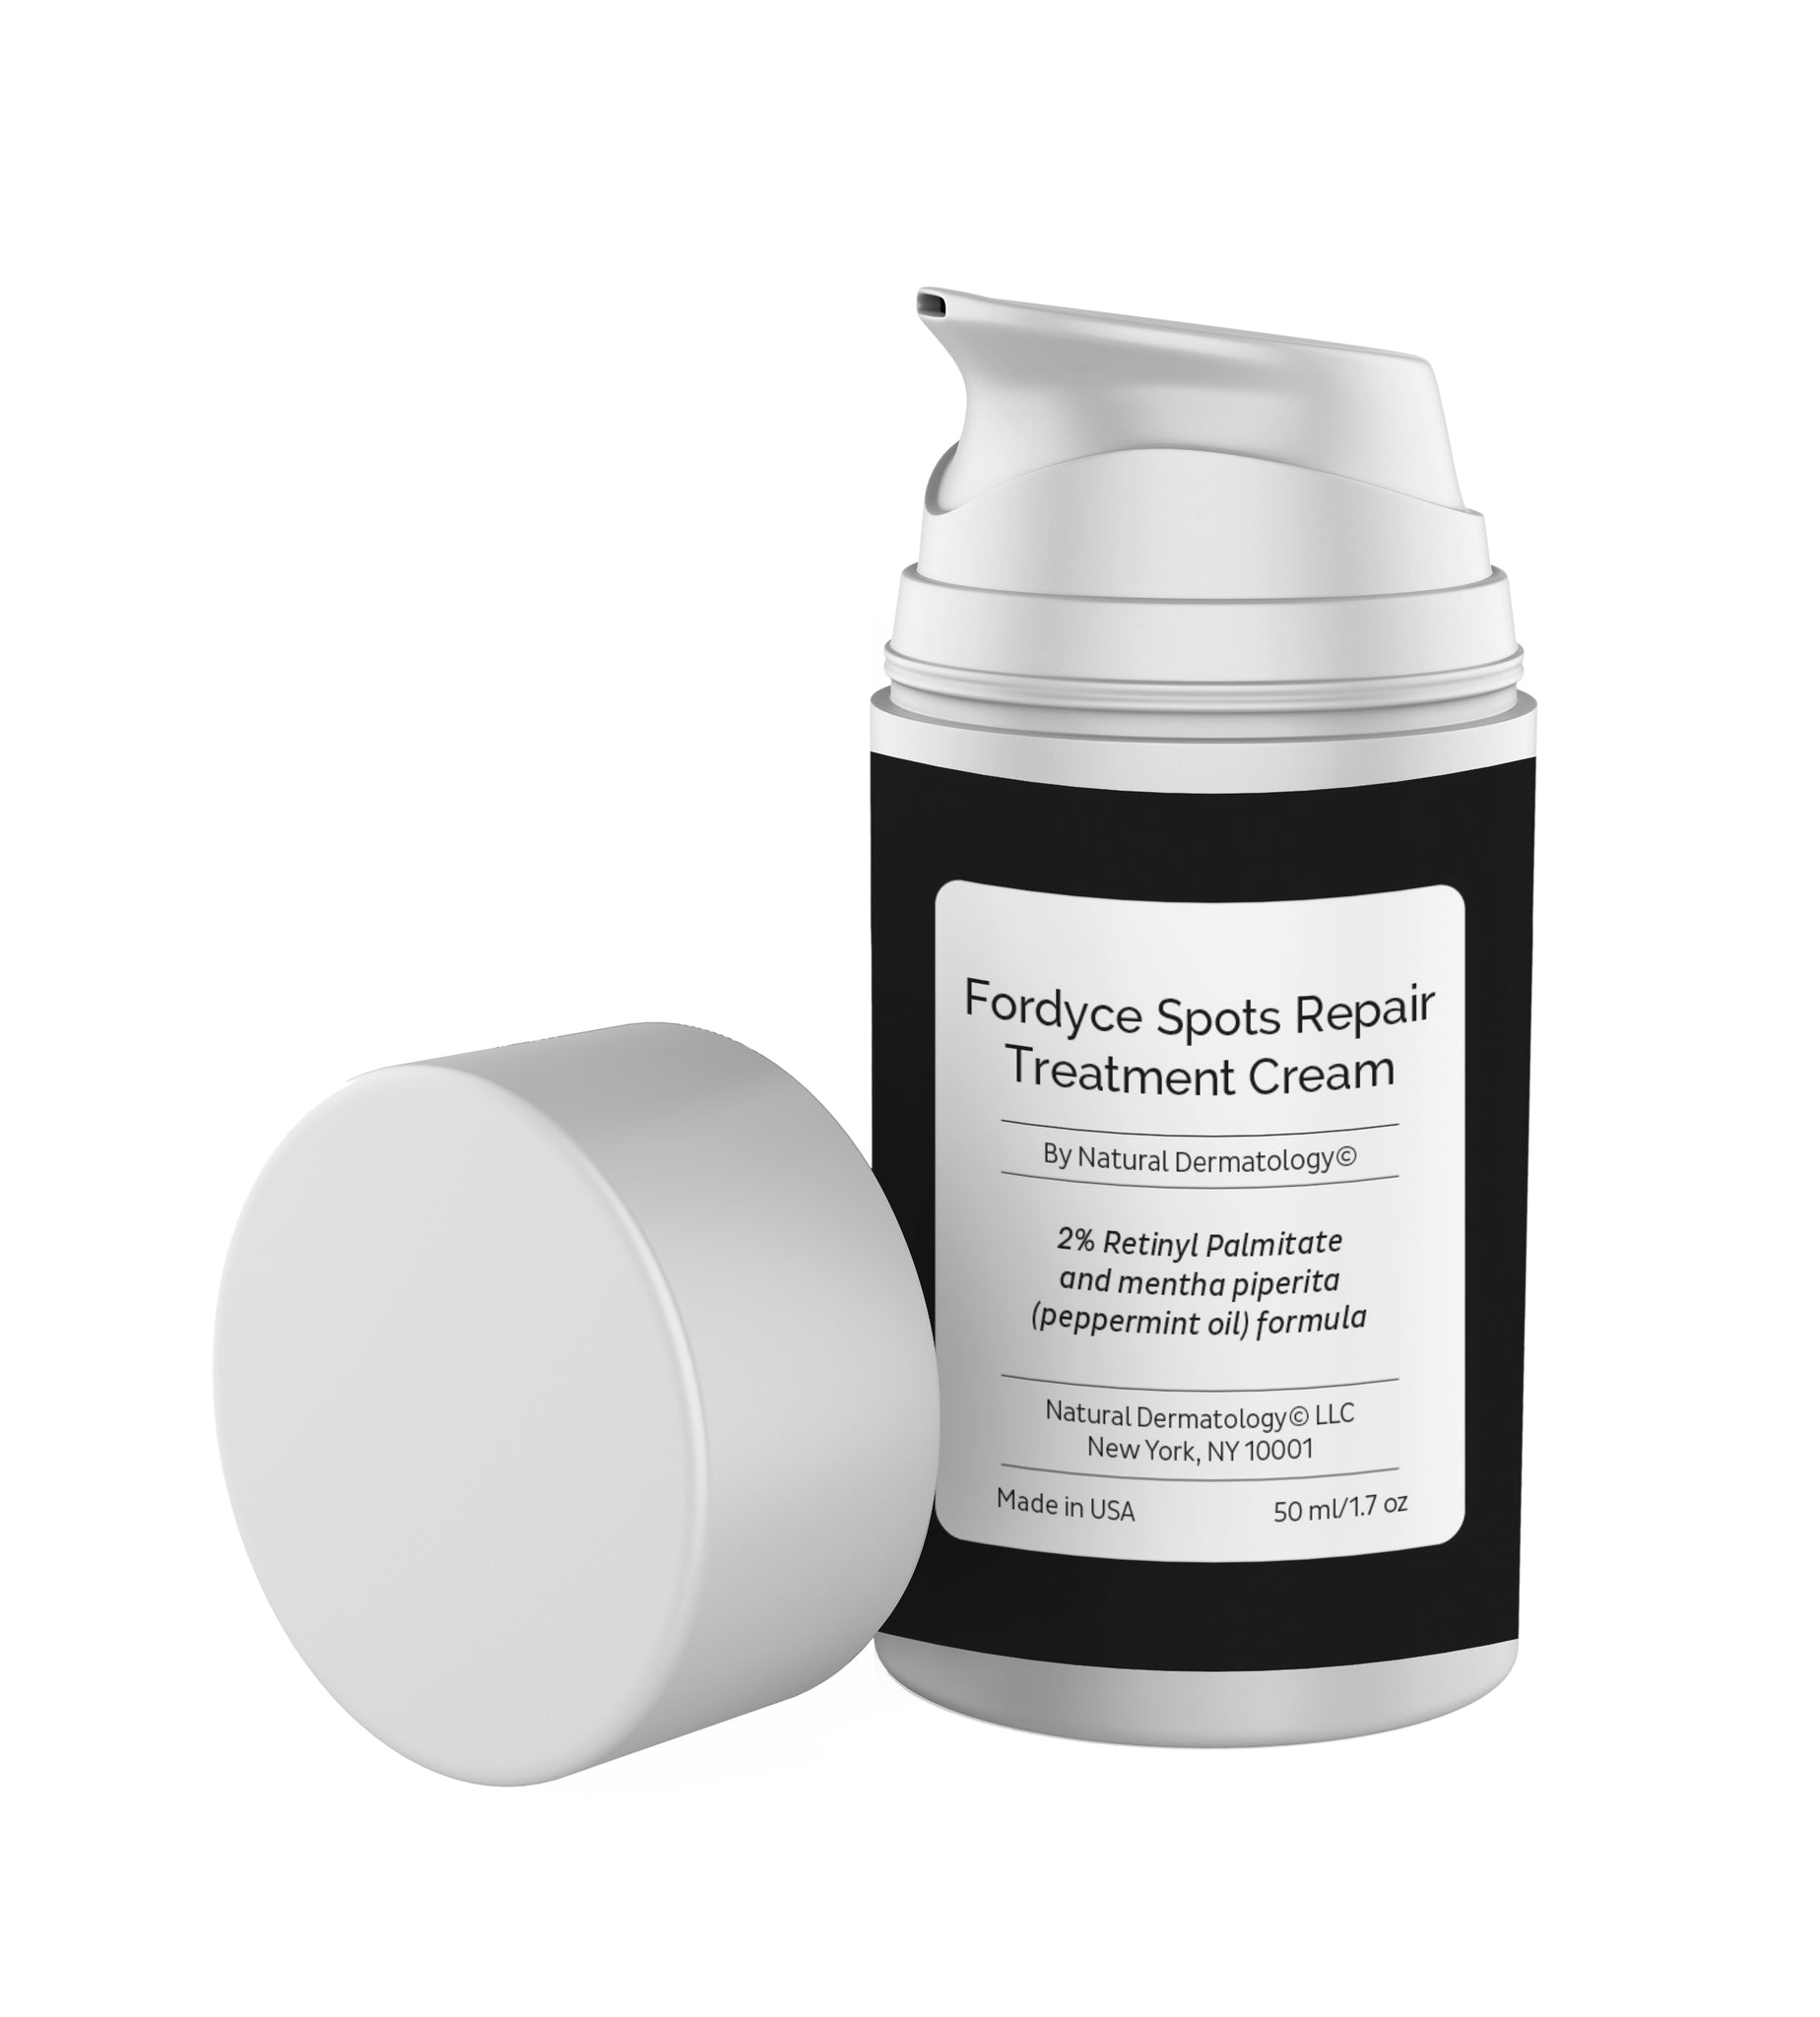 Fordyce Spots Repair Treatment Cream - by Natural Dermatology